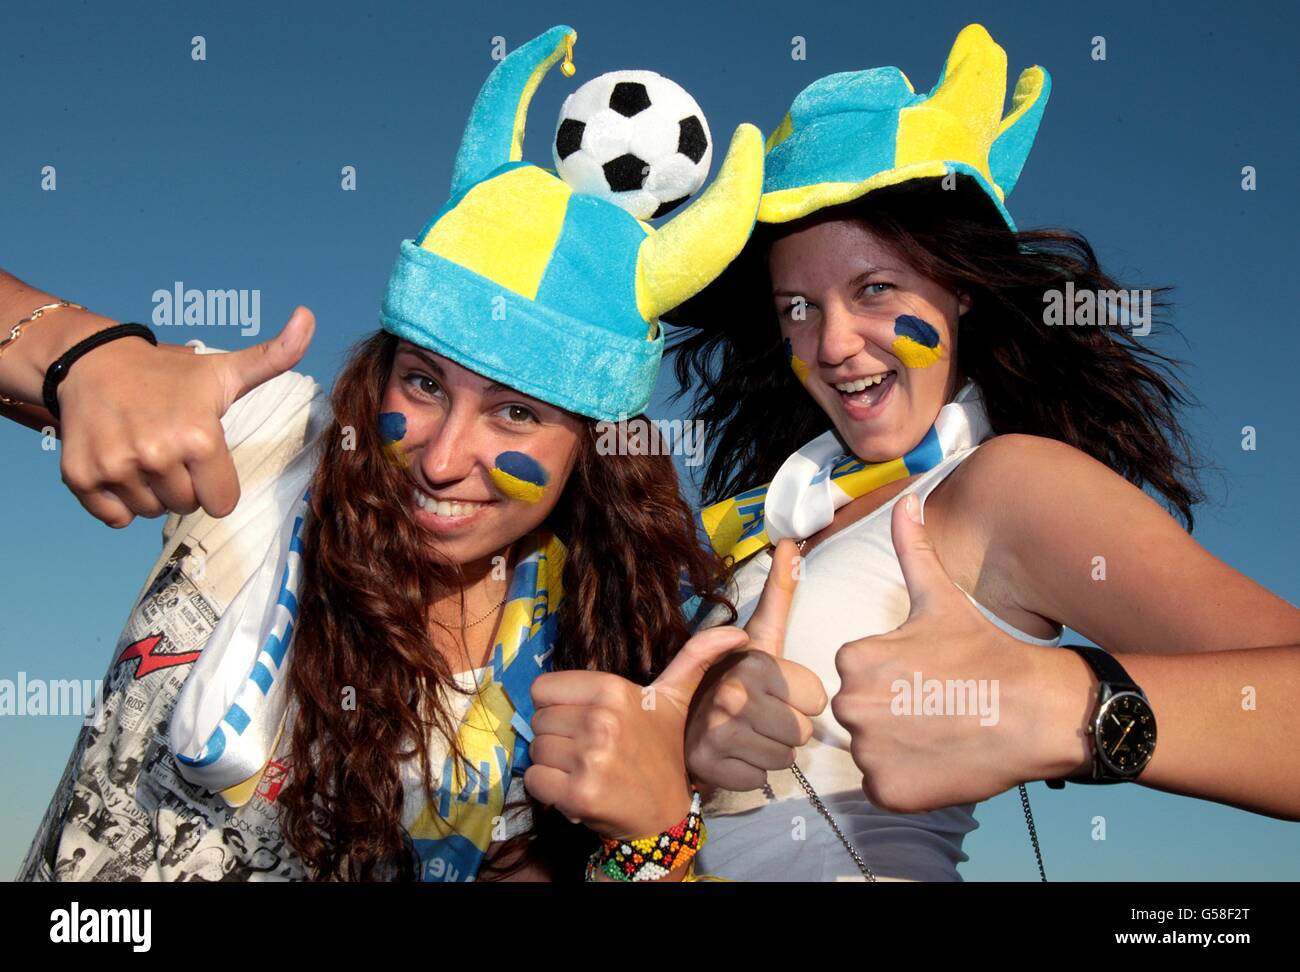 Soccer - UEFA Euro 2012 - Group D - England v Ukraine - Donbass Arena. Ukraine fans show their support outside the Donbass Arena prior to kick-off Stock Photo